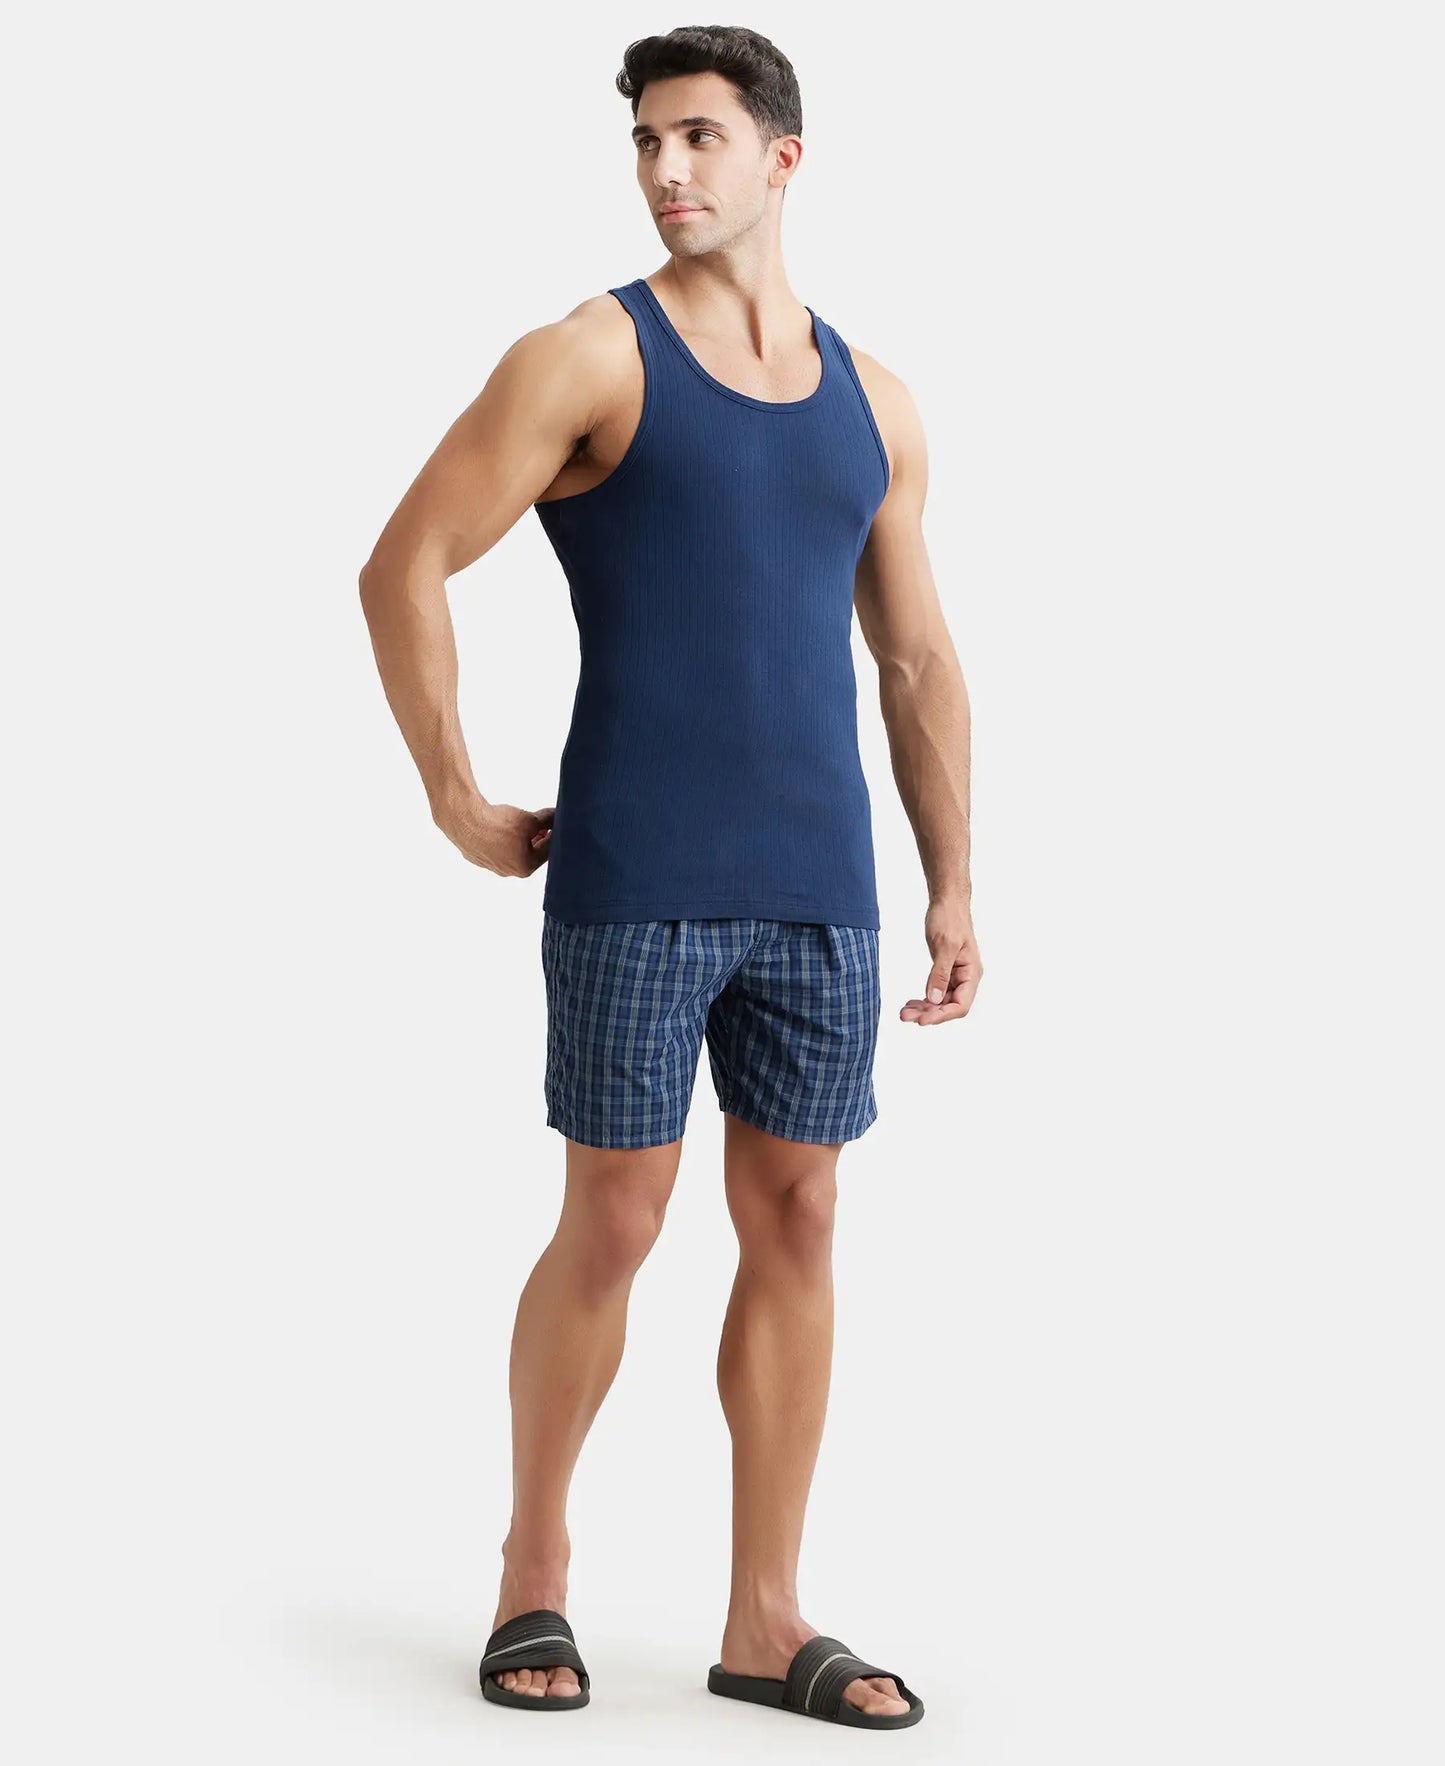 Super Combed Cotton Rib Round Neck with Racer Back Gym Vest - Navy-4